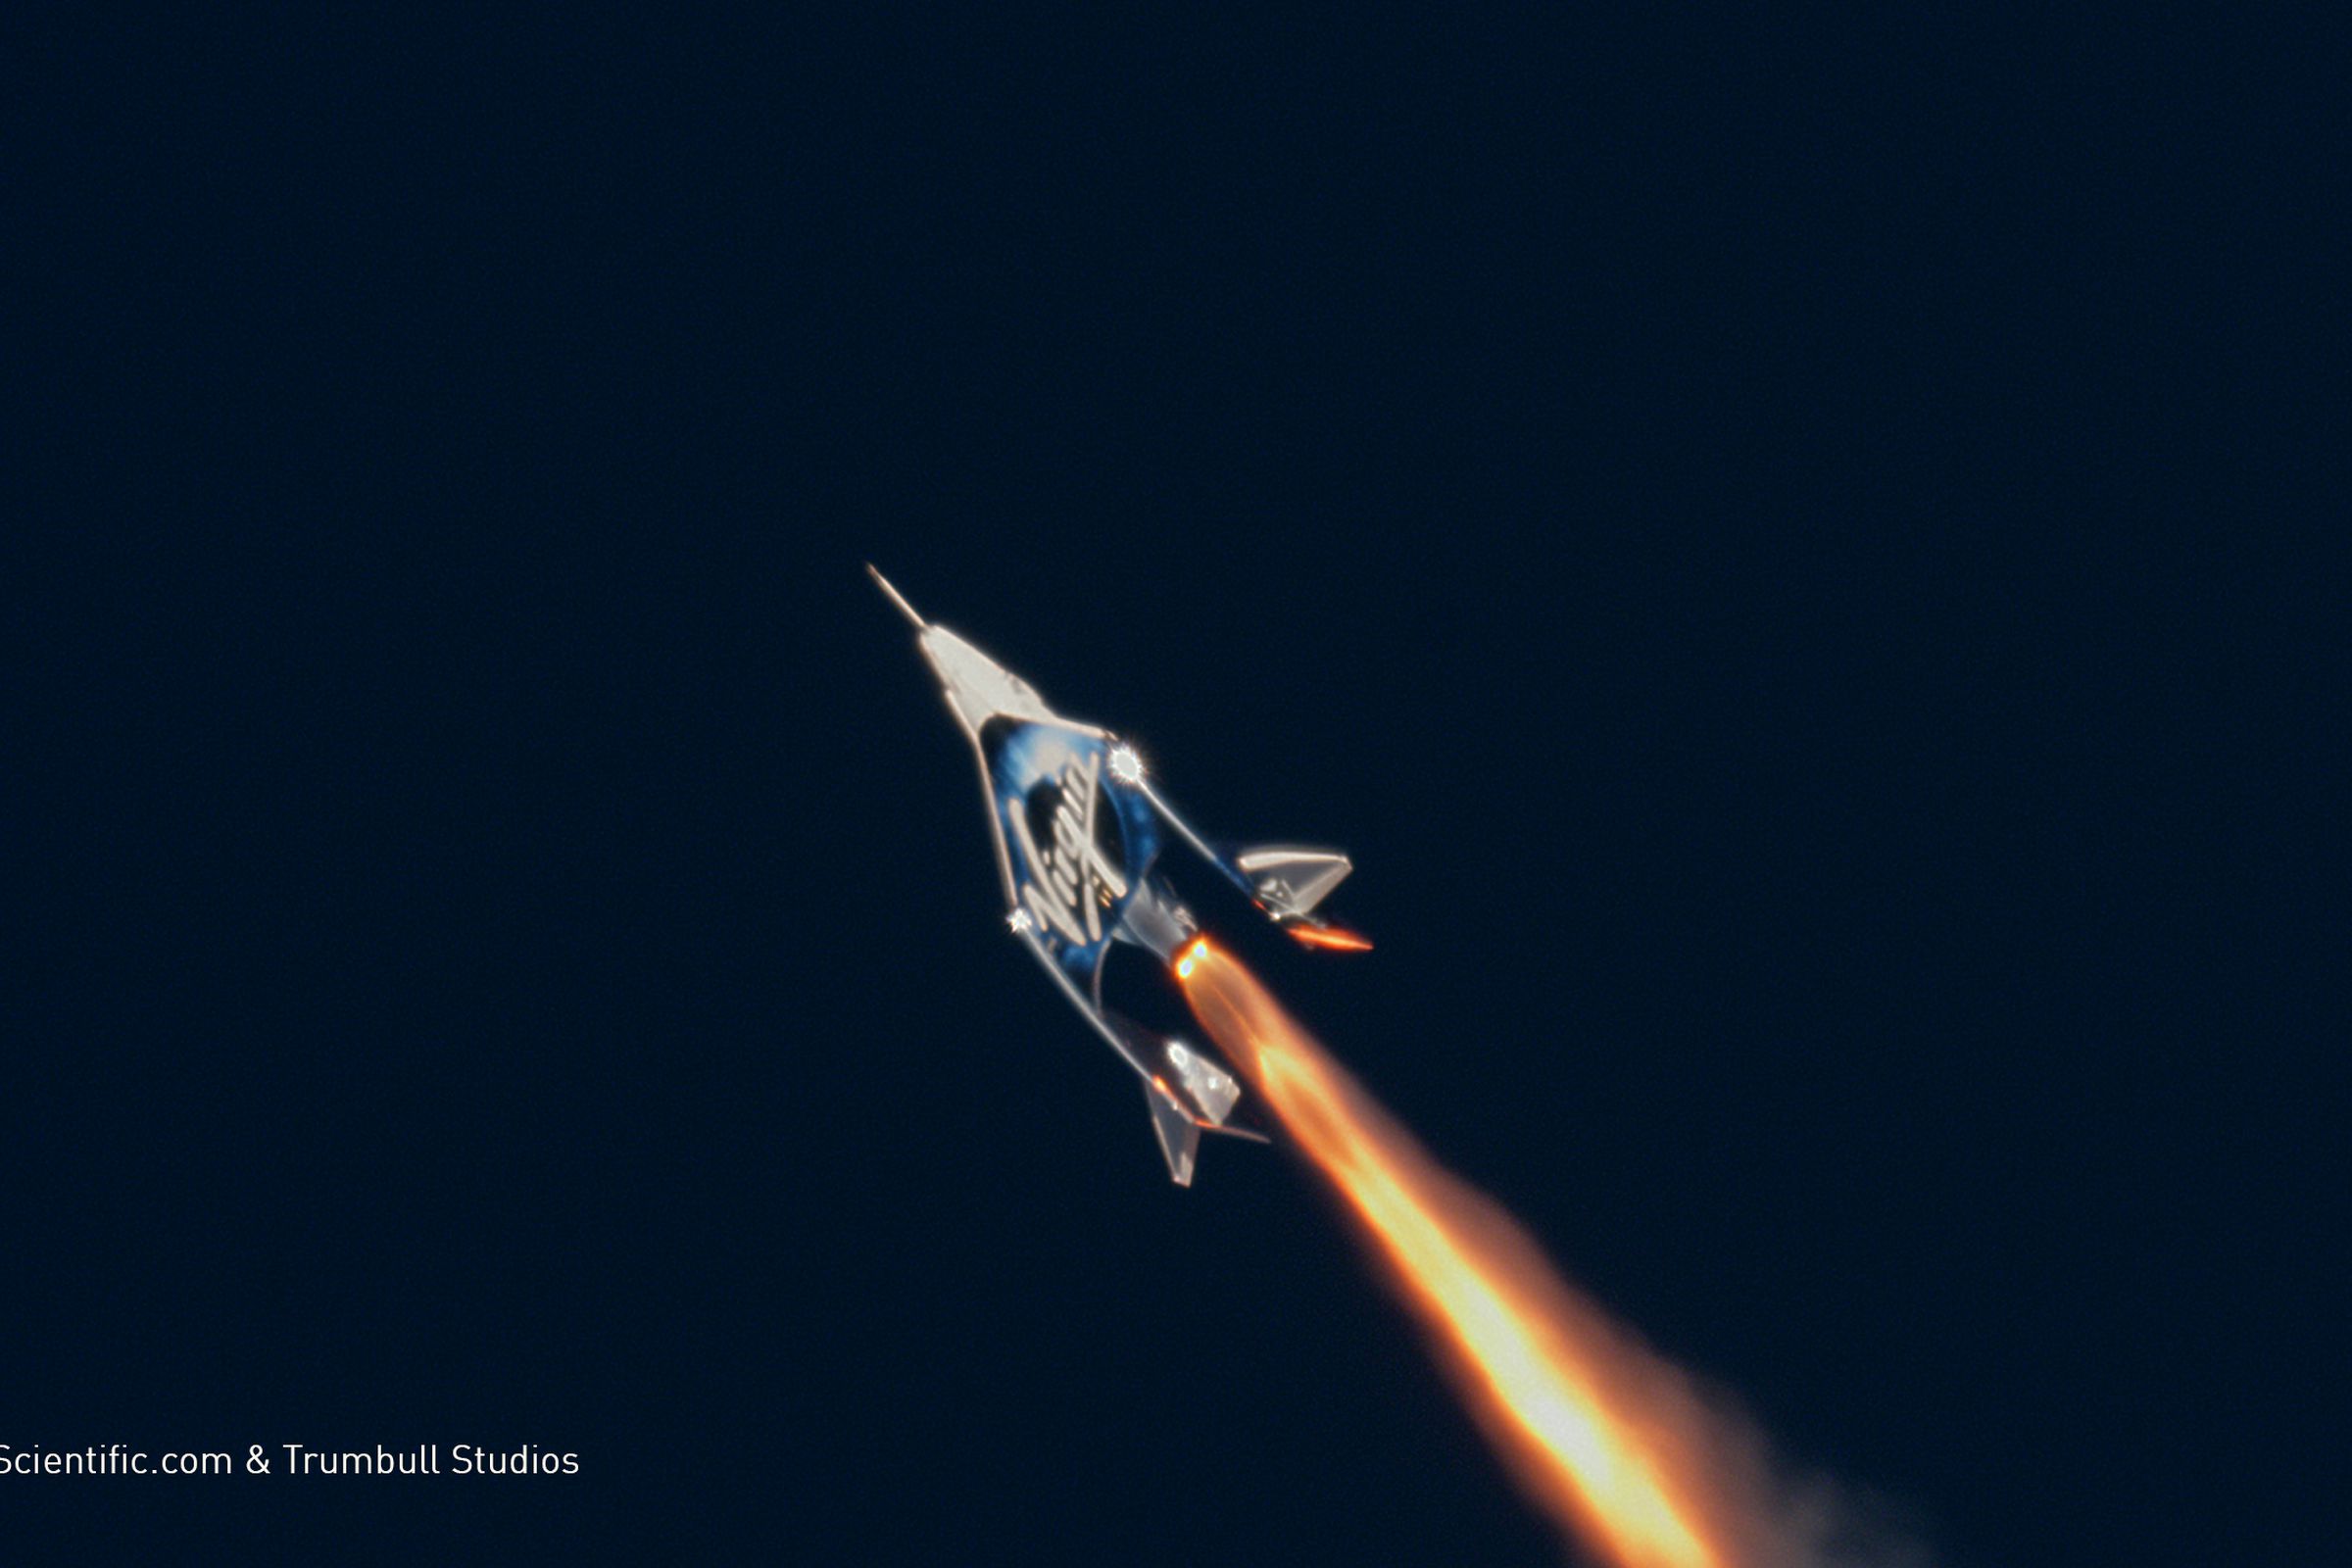 Virgin Galactic’s VSS Unity on its first trip to space